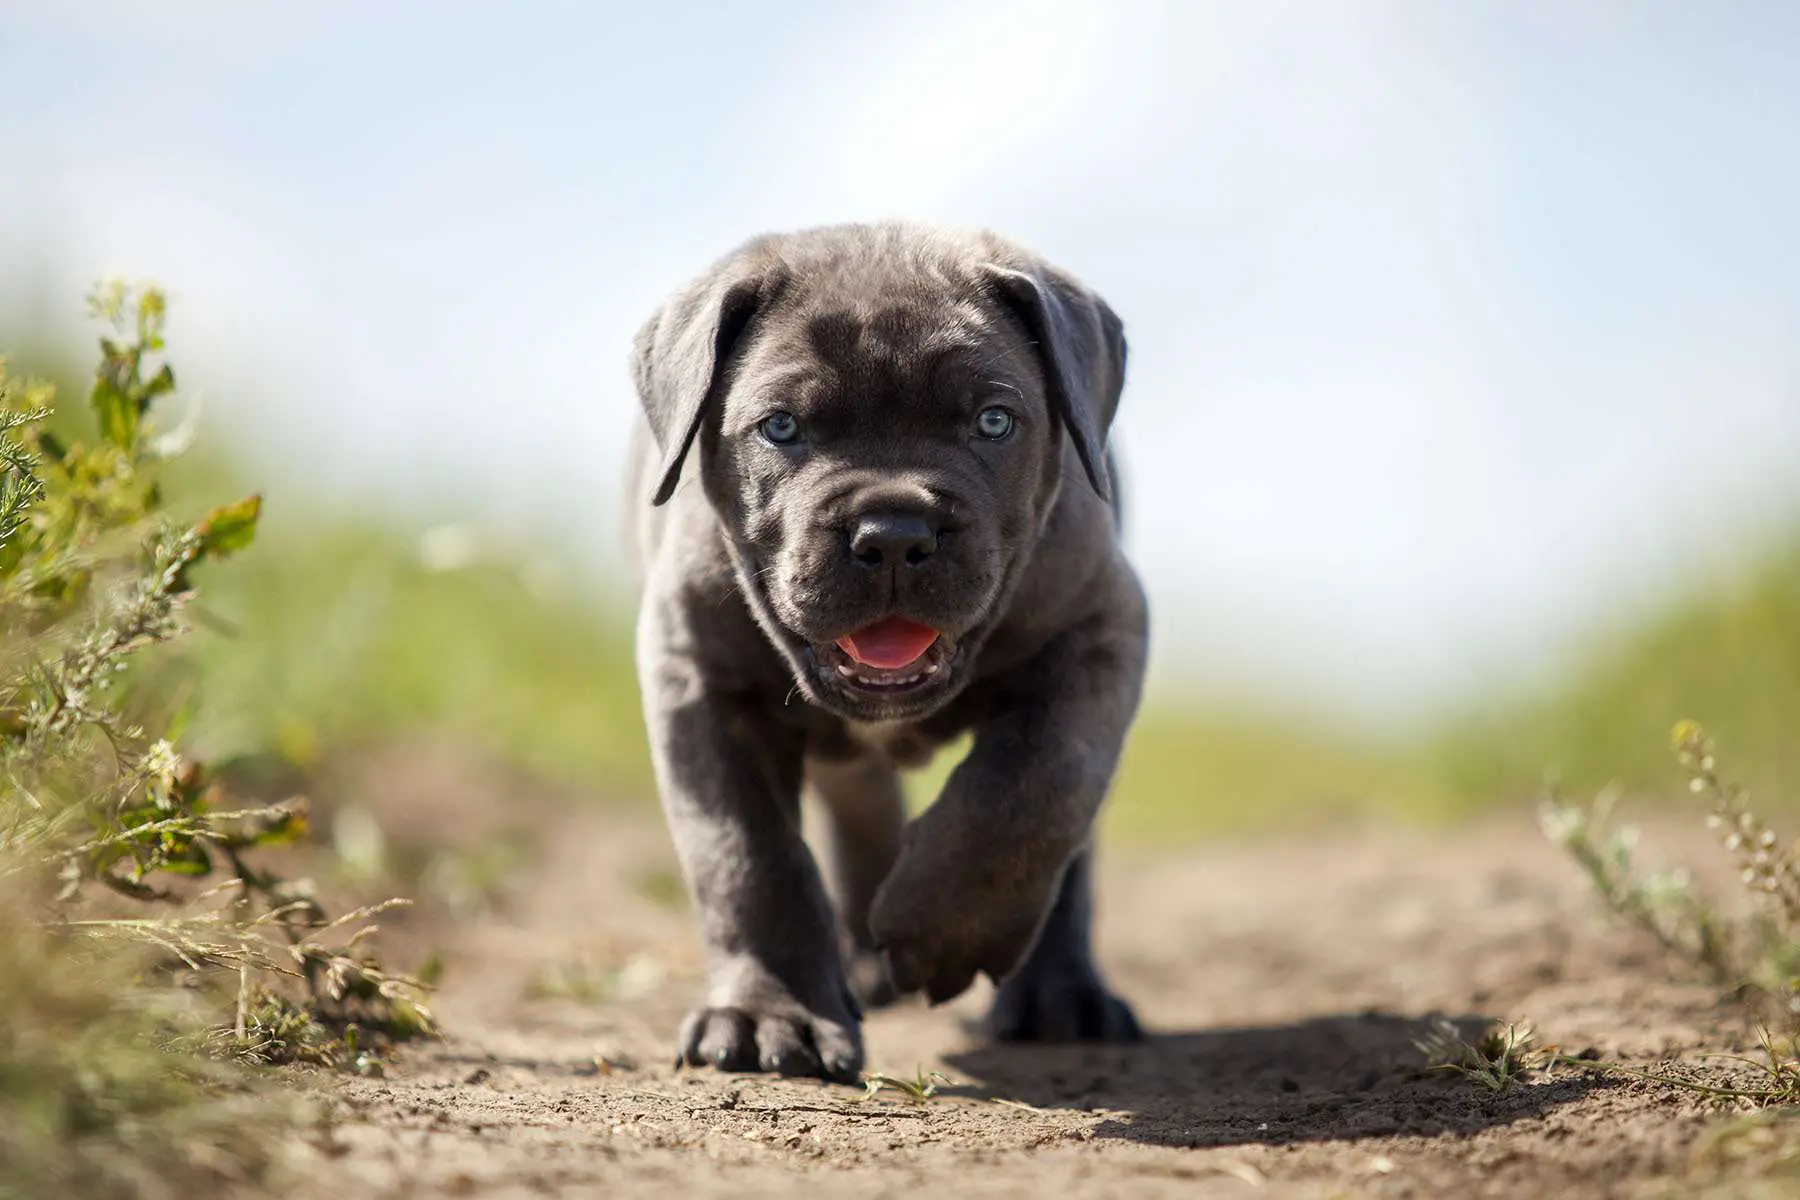 what is cane corso a mix of?